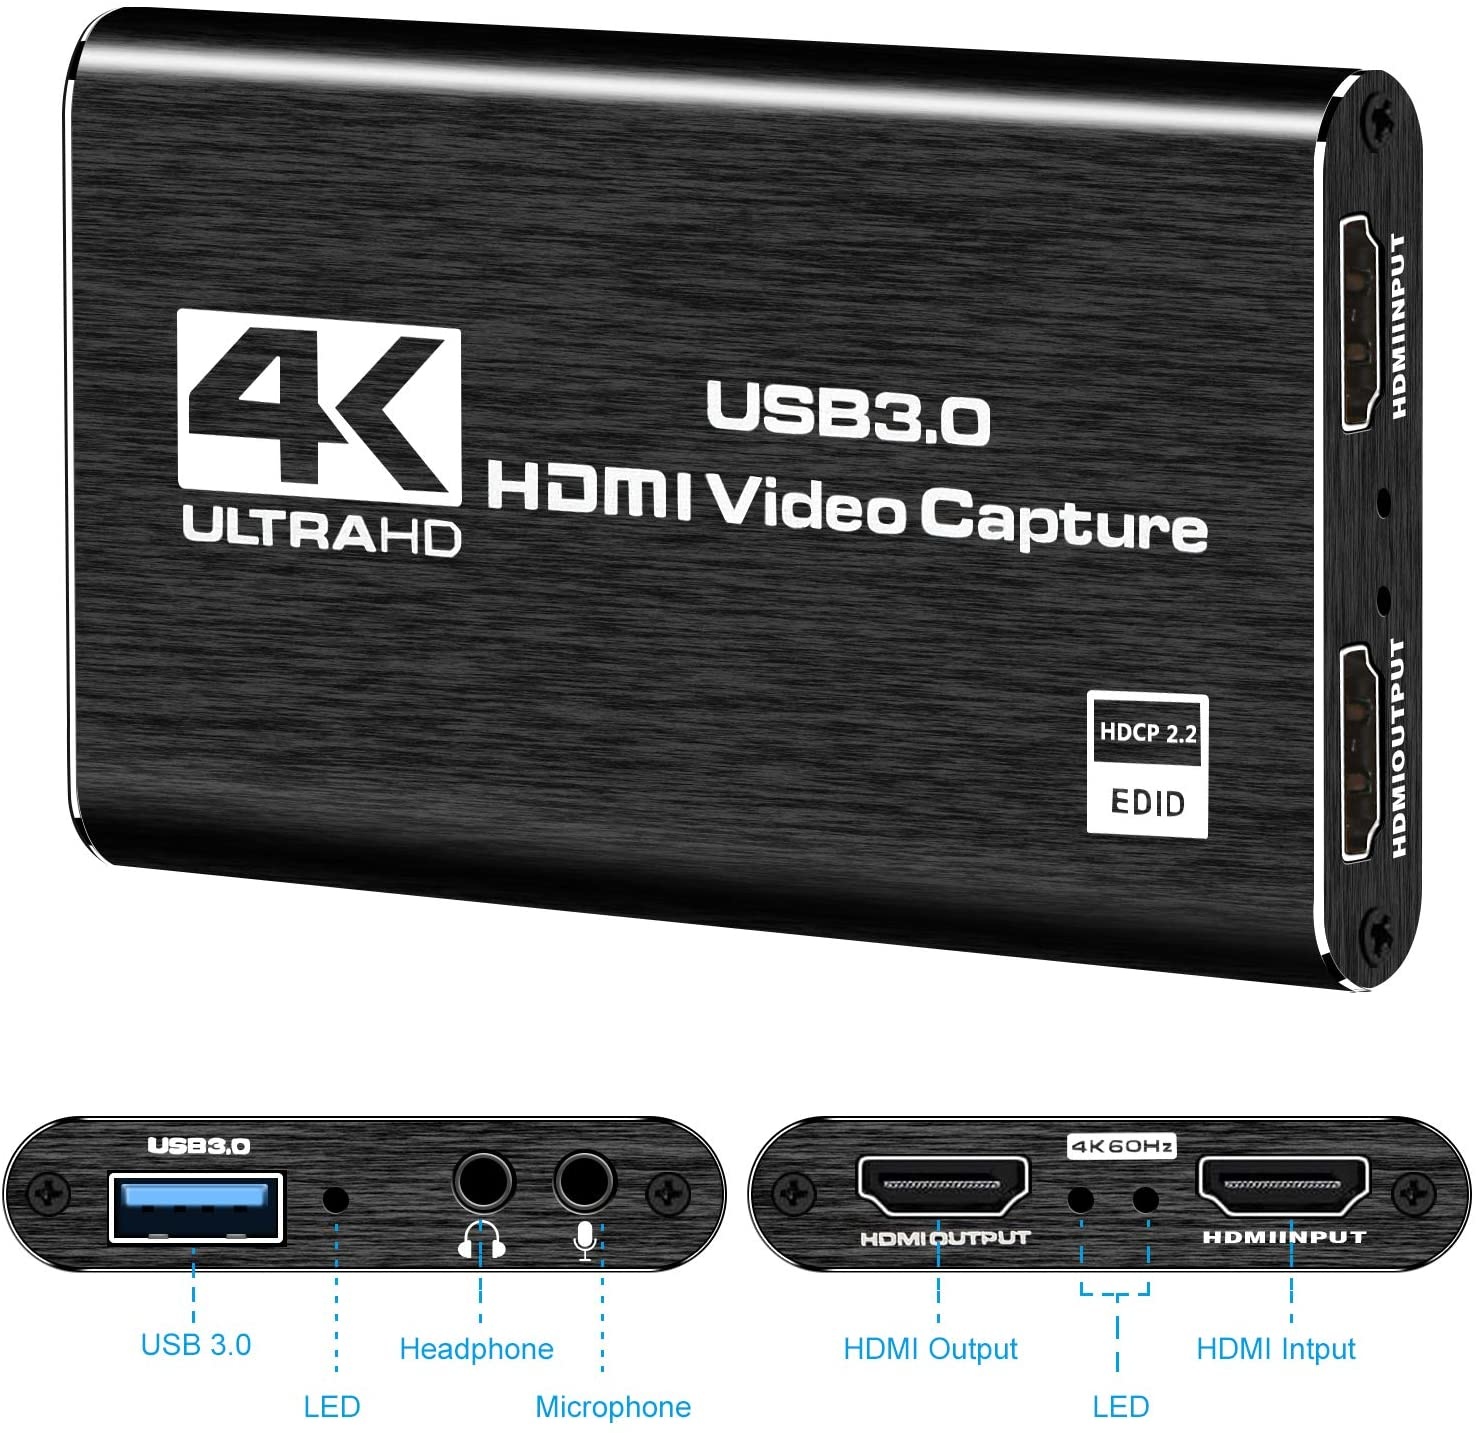 Cryo-PC 4K Audio Video Capture Card, USB 3.0 HDMI Video Capture Device,  Full HD 1080P for Game Recording, Live Streaming Broadcasting - NWCA Inc.